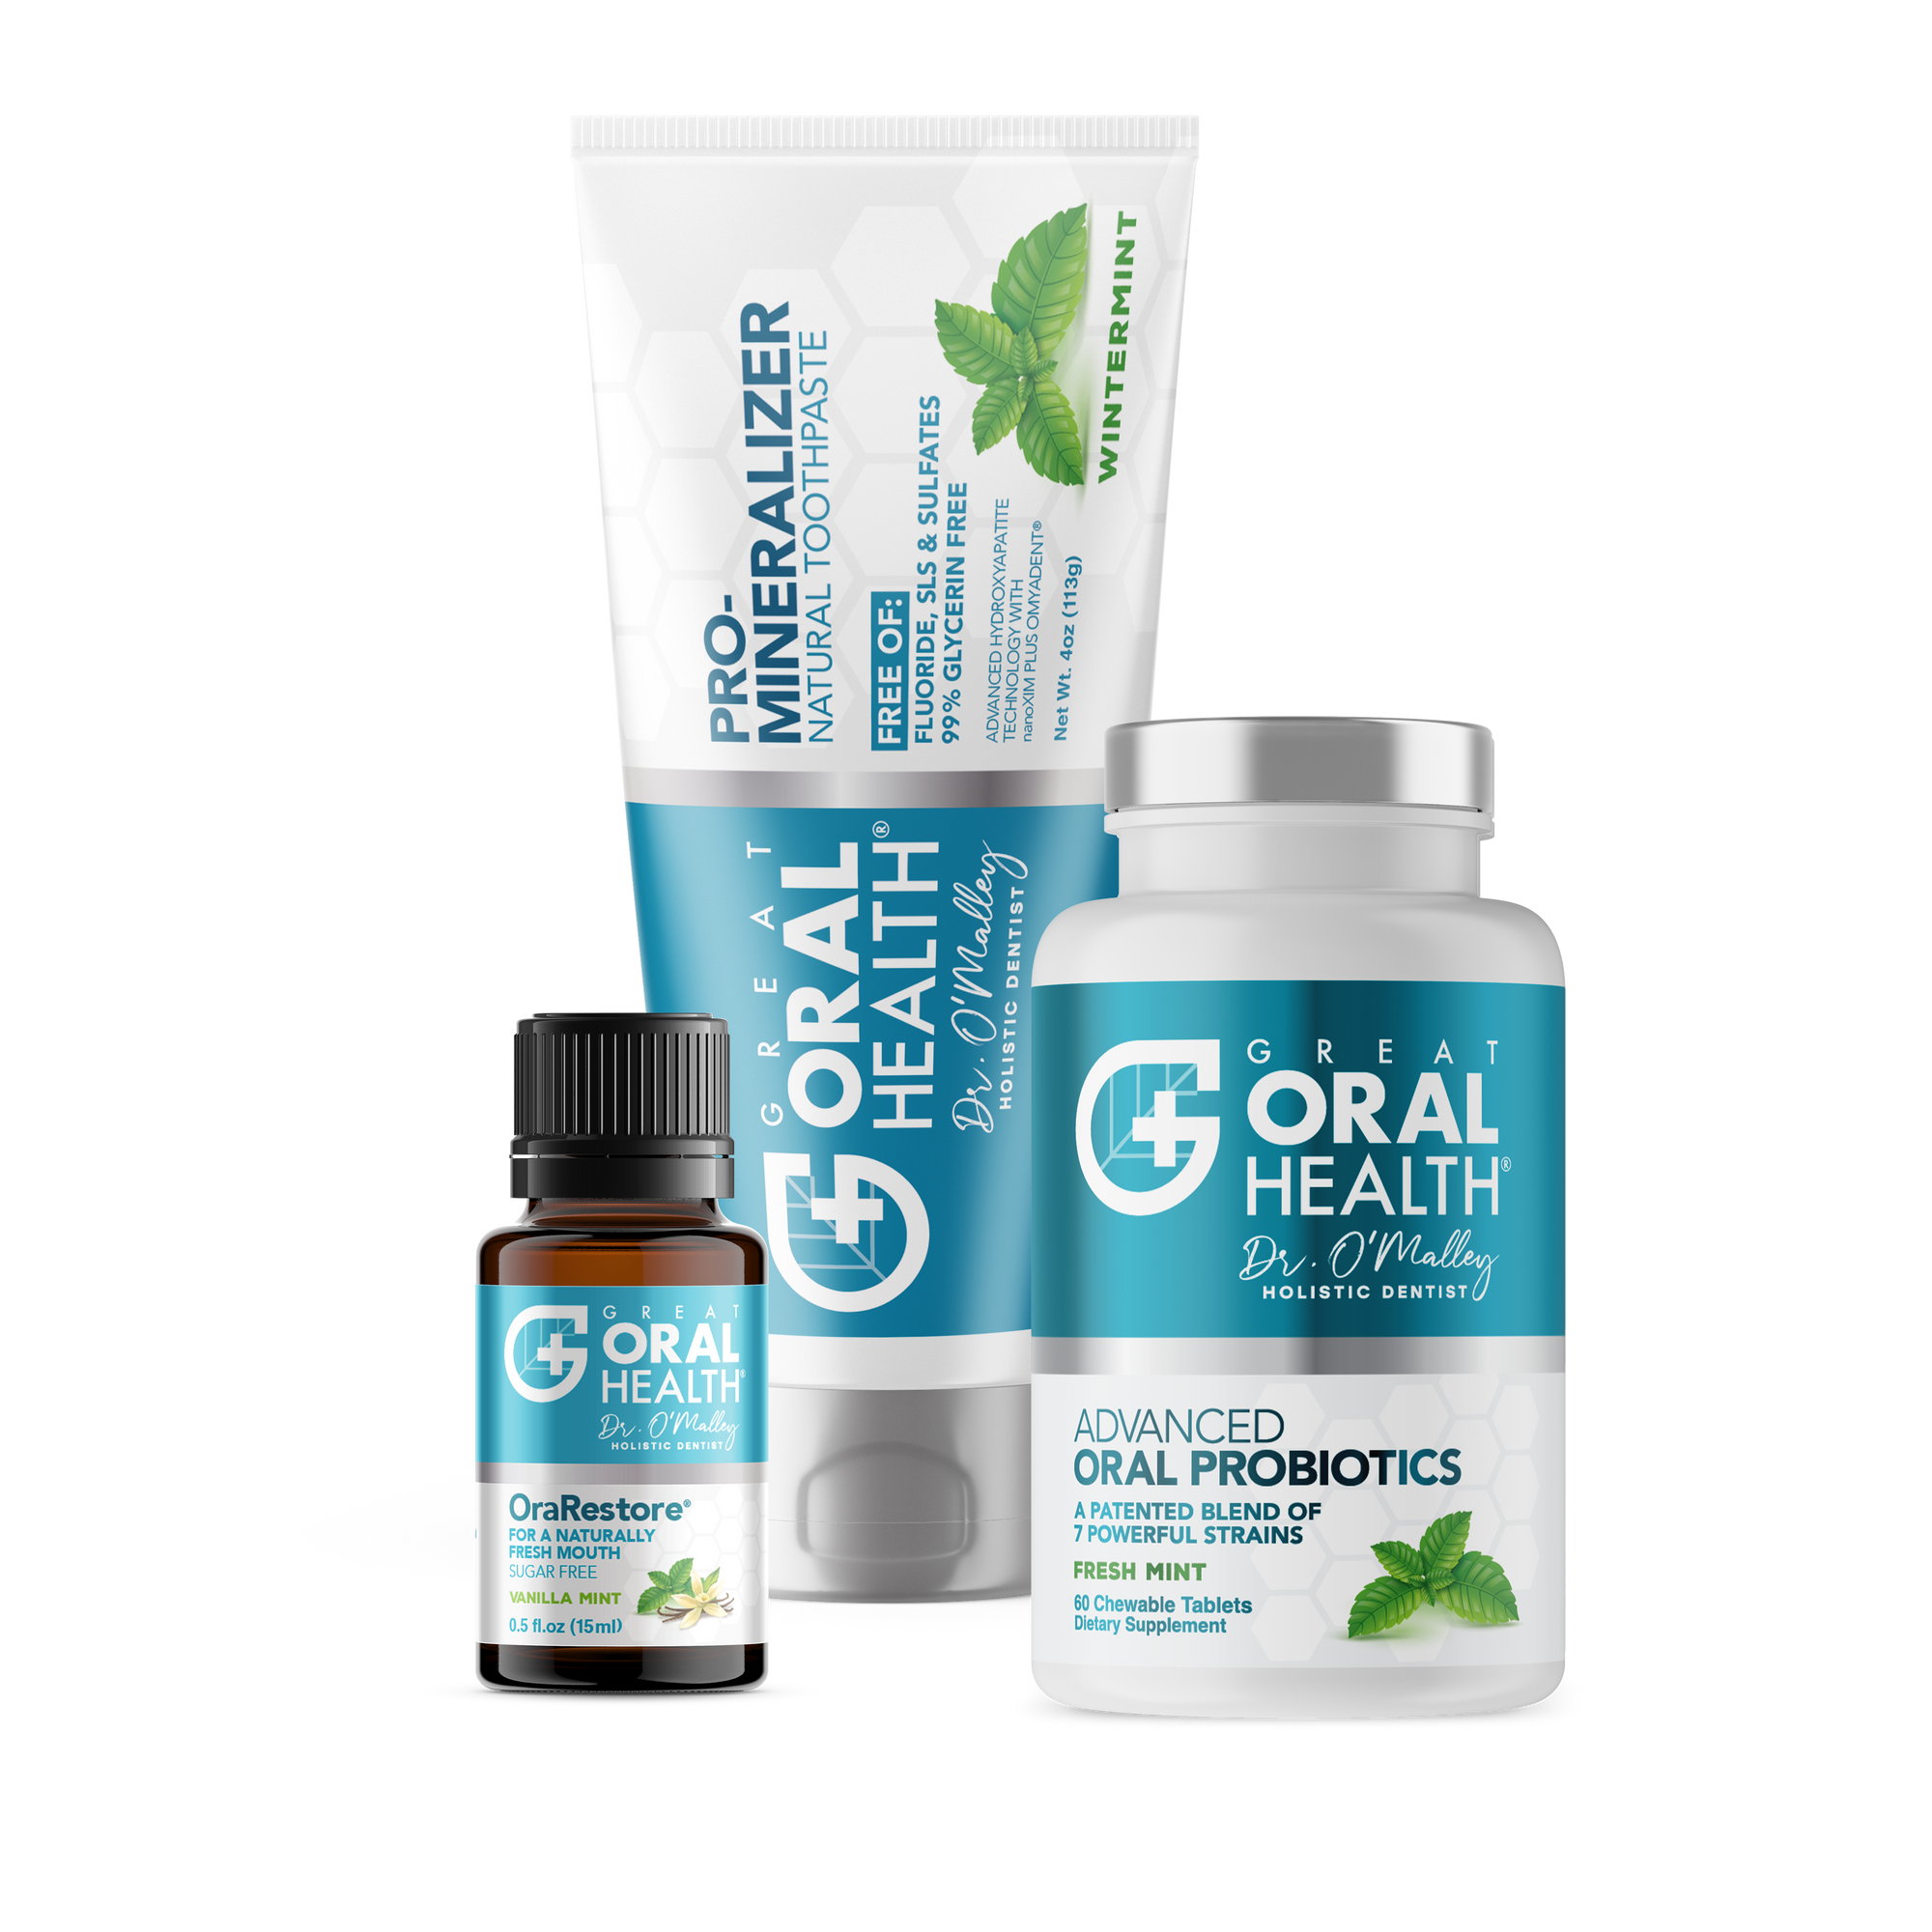 The Top Trio for Oral Hygiene & Healthy Gums: Oral Probiotics, Remineralizing Toothpaste and Essential Oil Blend